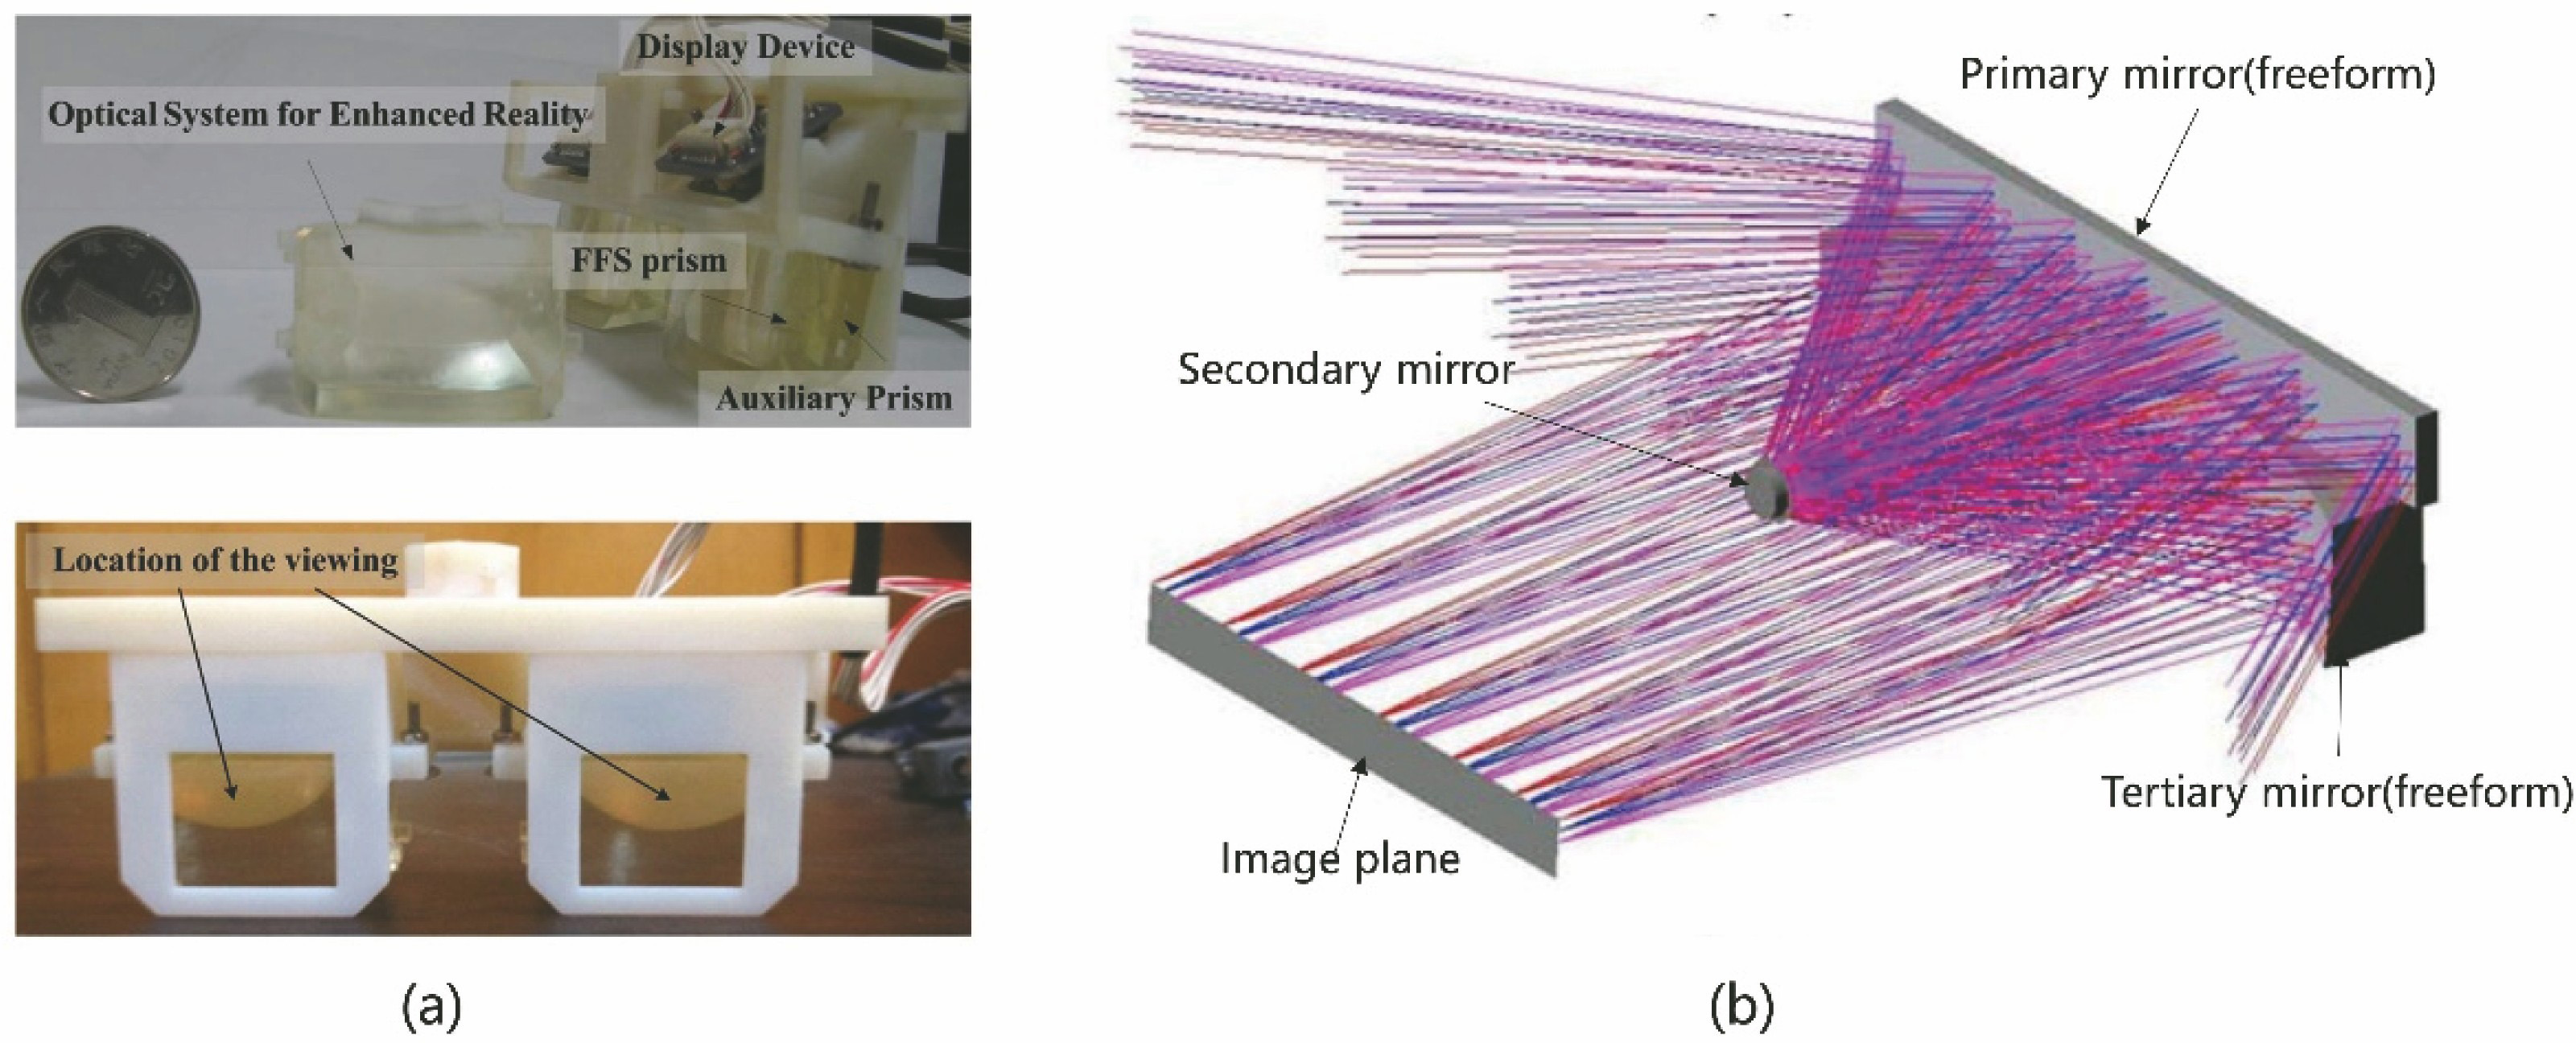 Typical applications of optical freeform surfaces. (a) AR head-mounted display[7]; (b) off-axis three-mirror system with ultra-wide field of view[20]